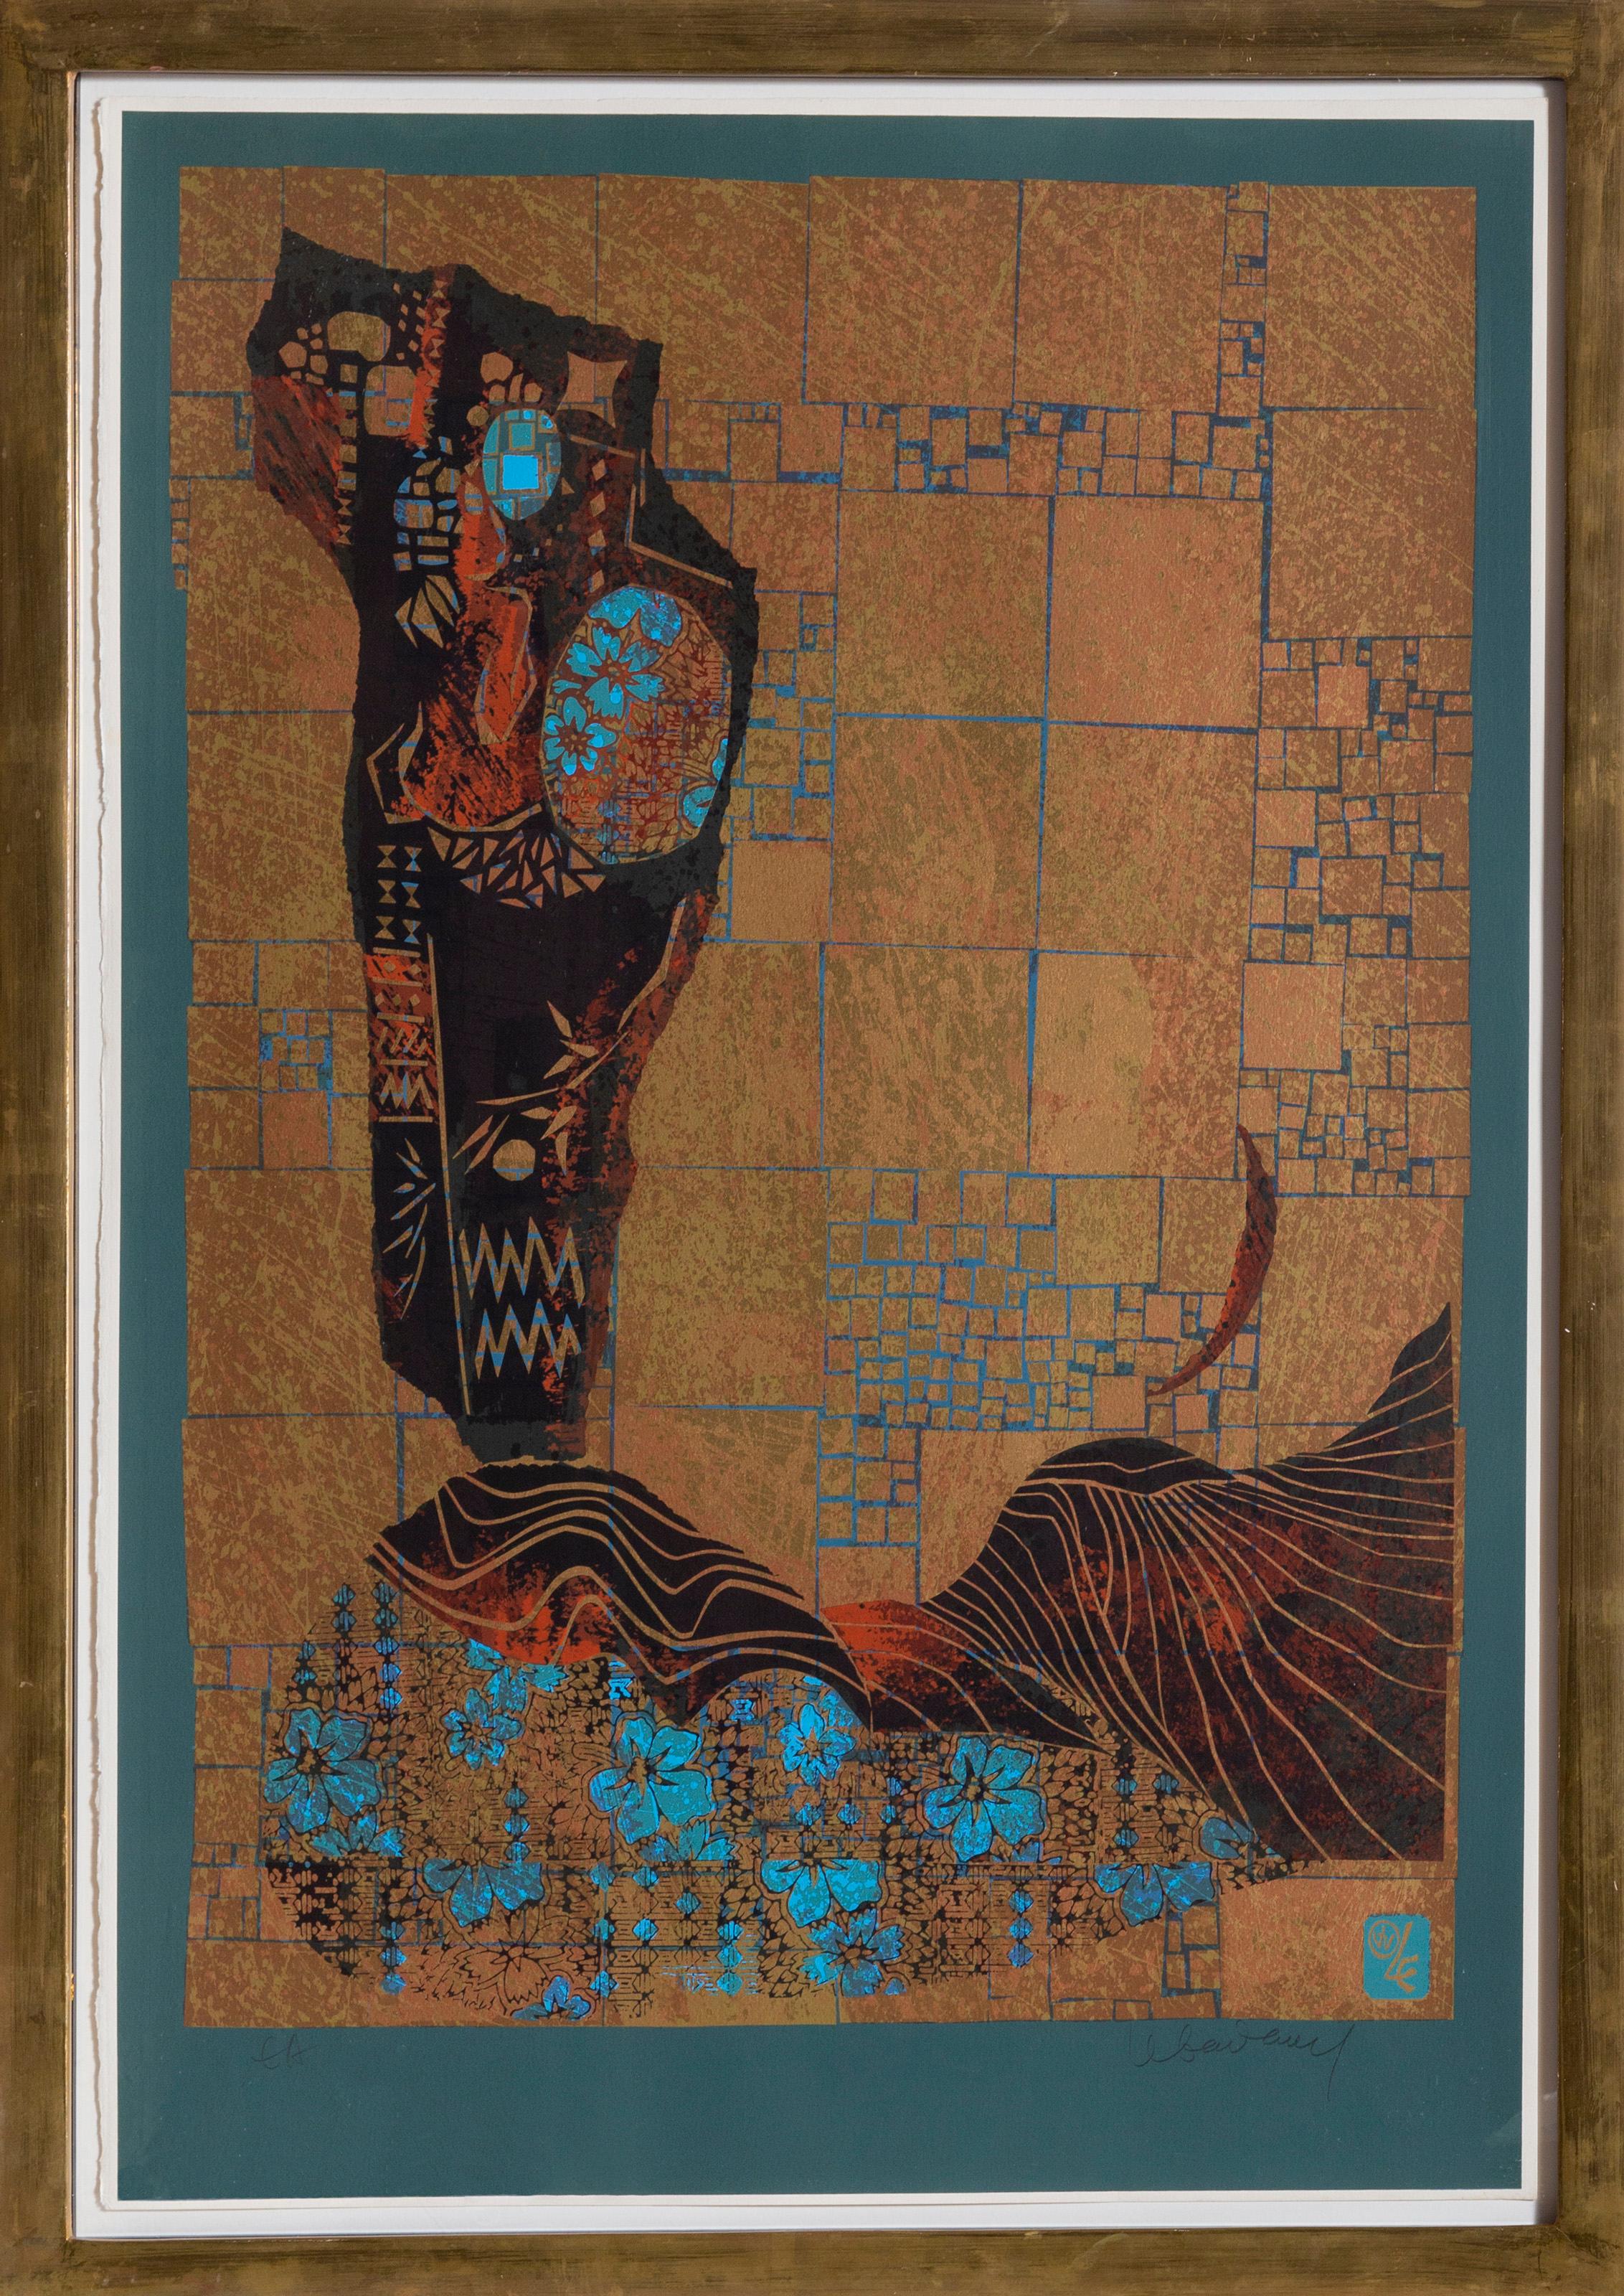 Lebadang (aka Hoi), Vietnamese (1922 - 2015) -  Untitled - Nude and Mirror. Year: circa 1977, Medium: Screenprint, signed and numbered in pencil, Edition: EA, Size: 30  x 22 in. (76.2  x 55.88 cm), Frame Size: 33 x 25 inches 